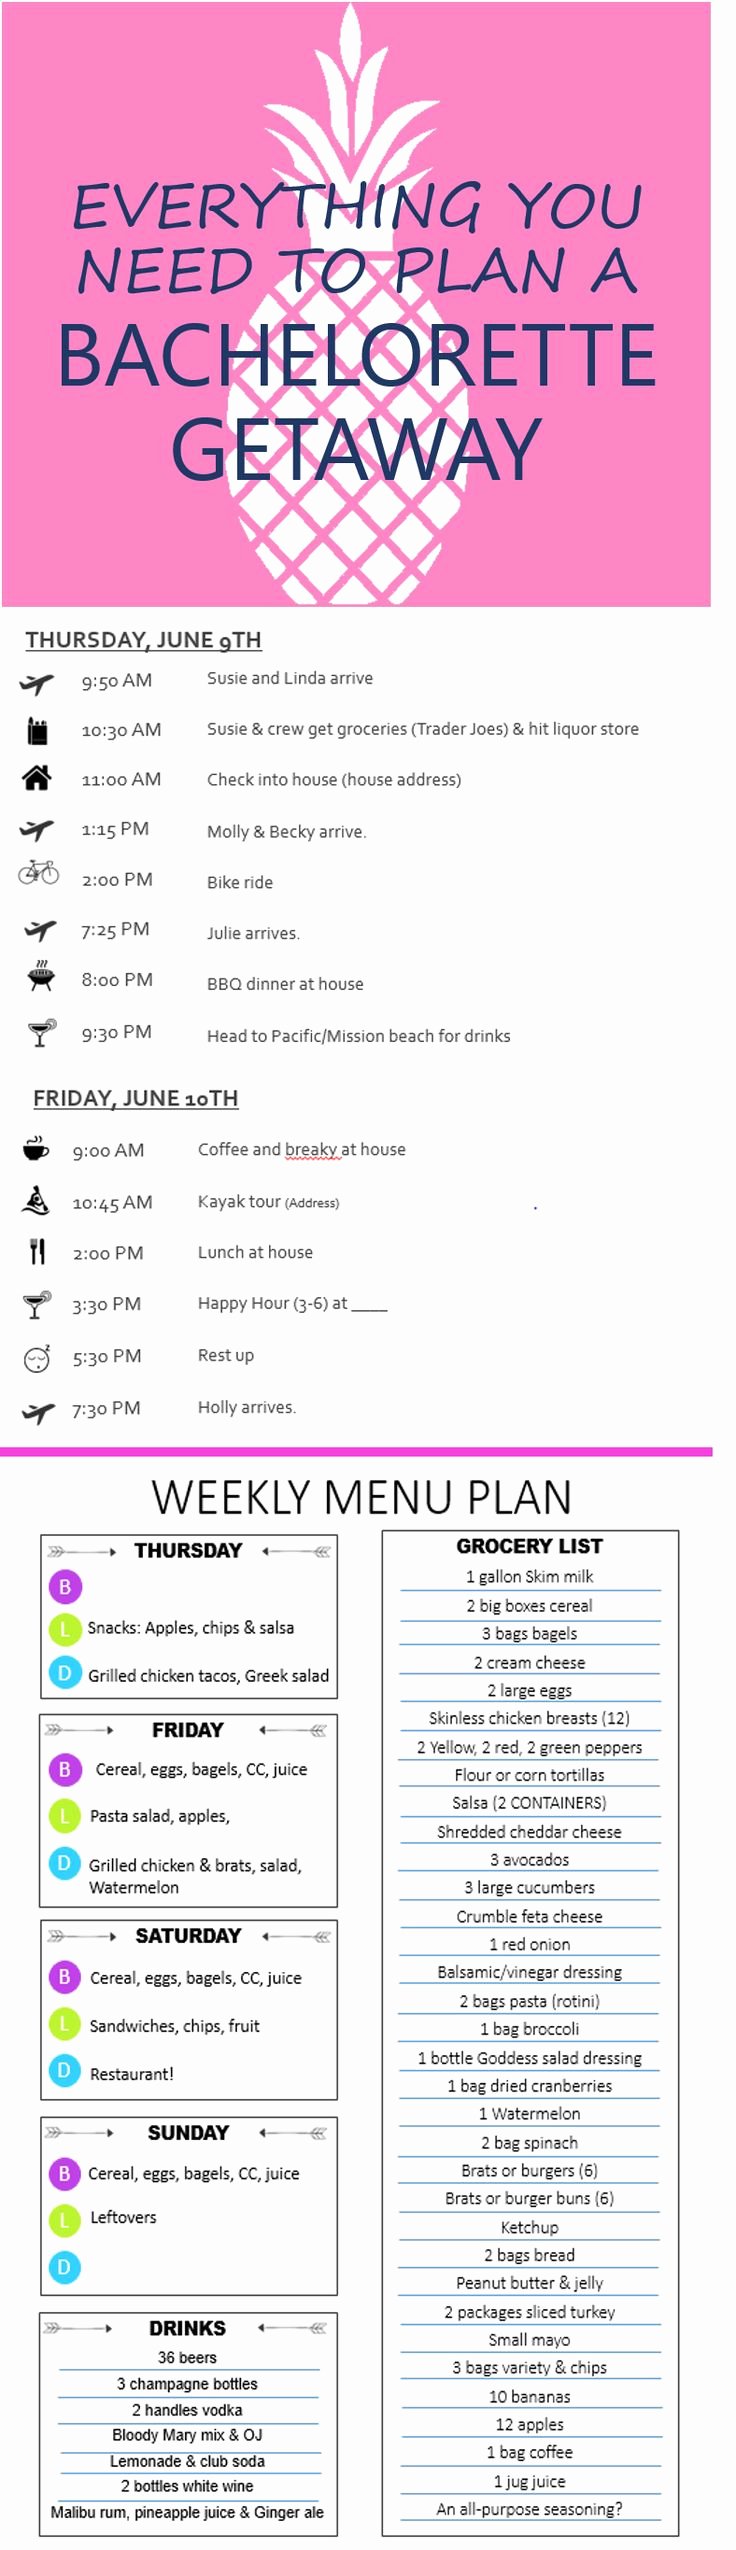 Bachelorette Party Itinerary Template Luxury Everything You Need to Plan A Bachelorette Party Away